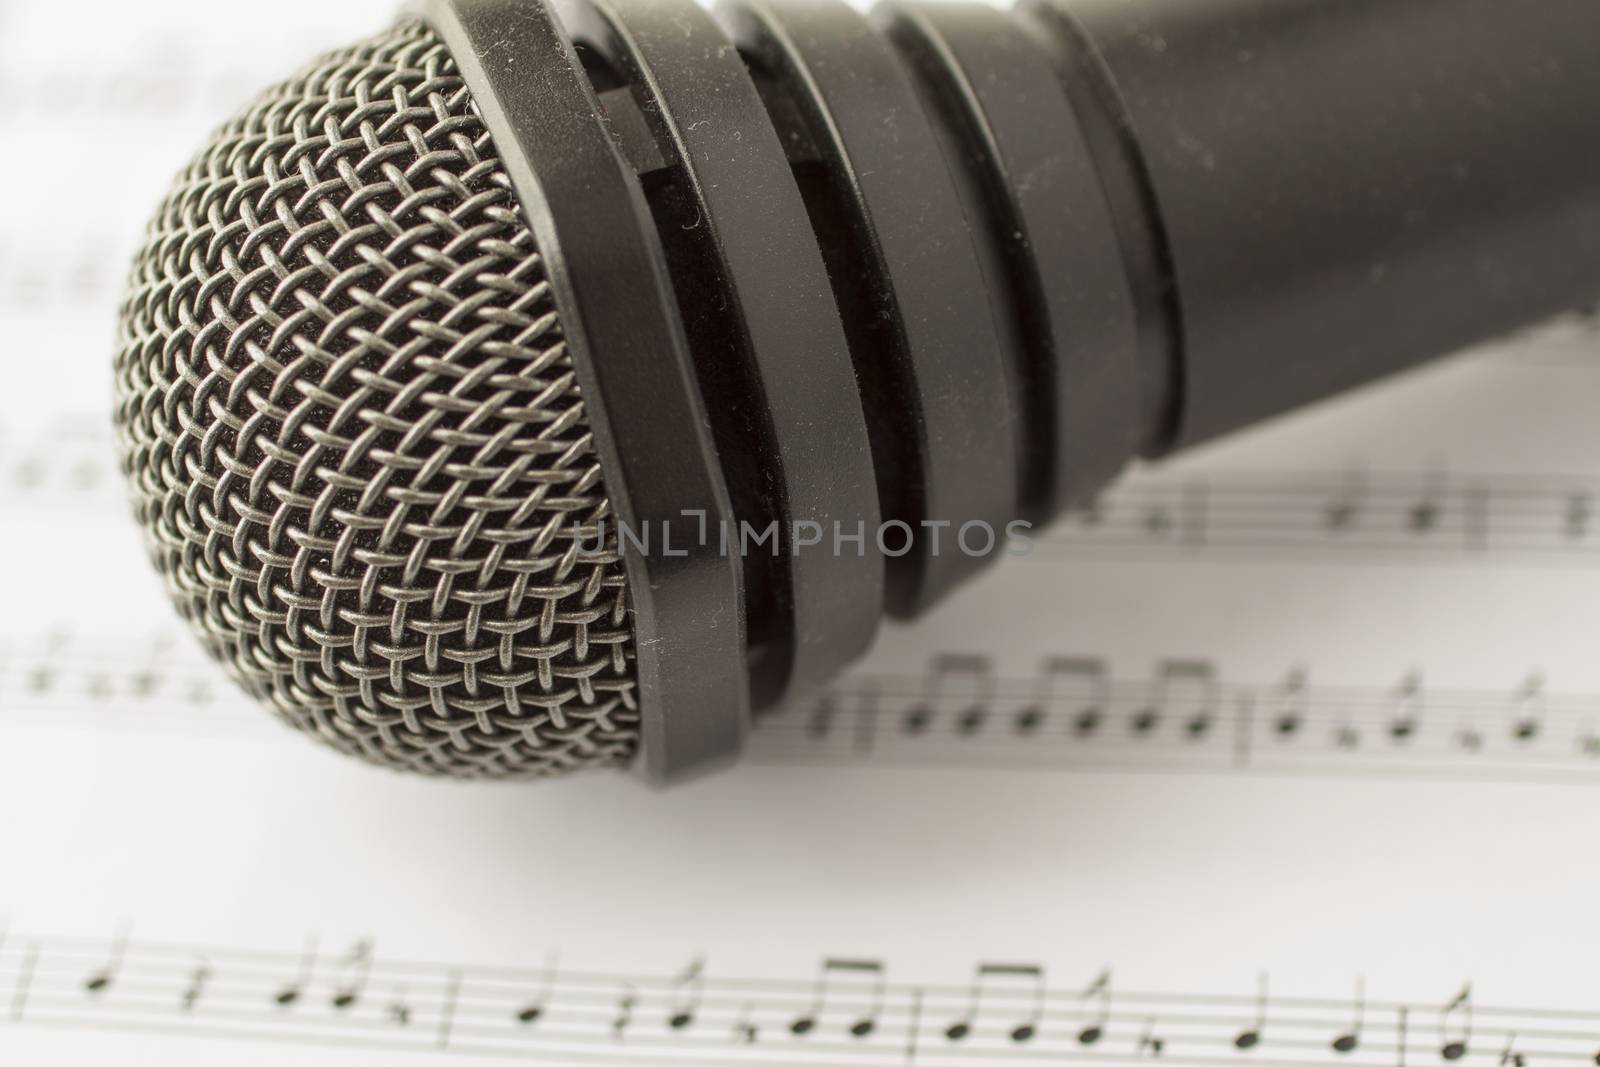 Black microphone over musical score, horizontal image